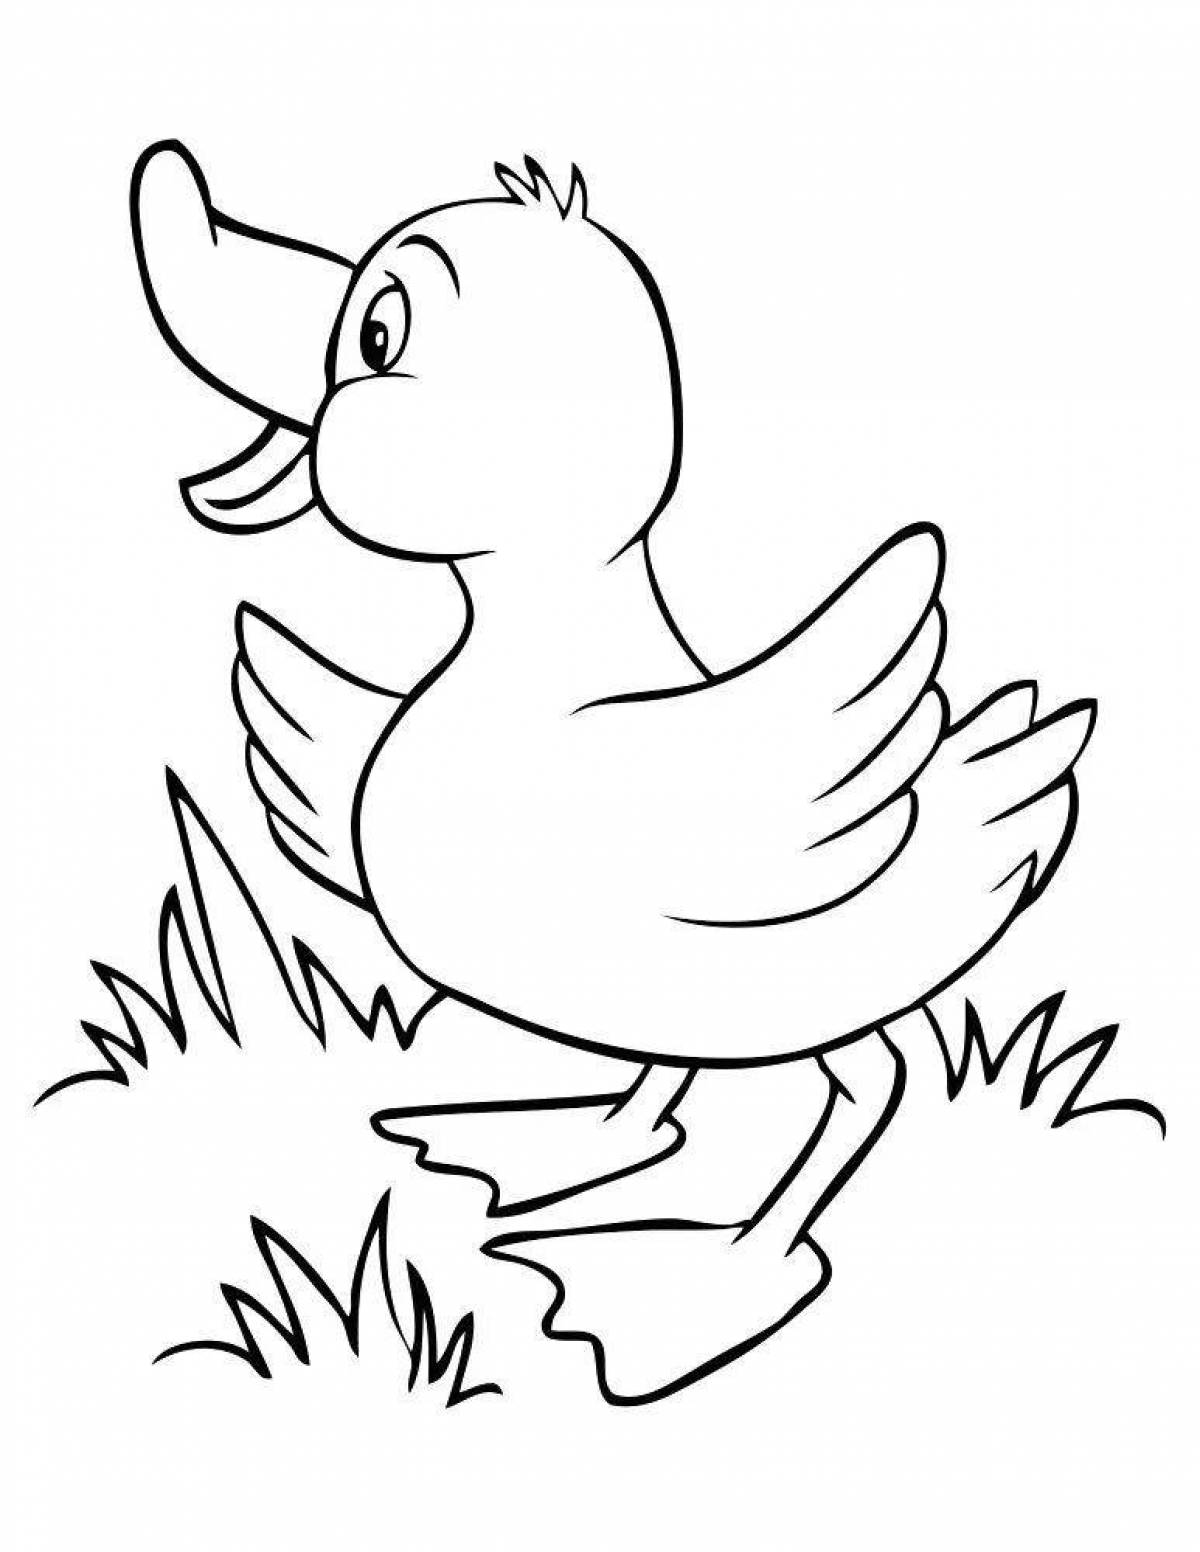 Coloring duck for children